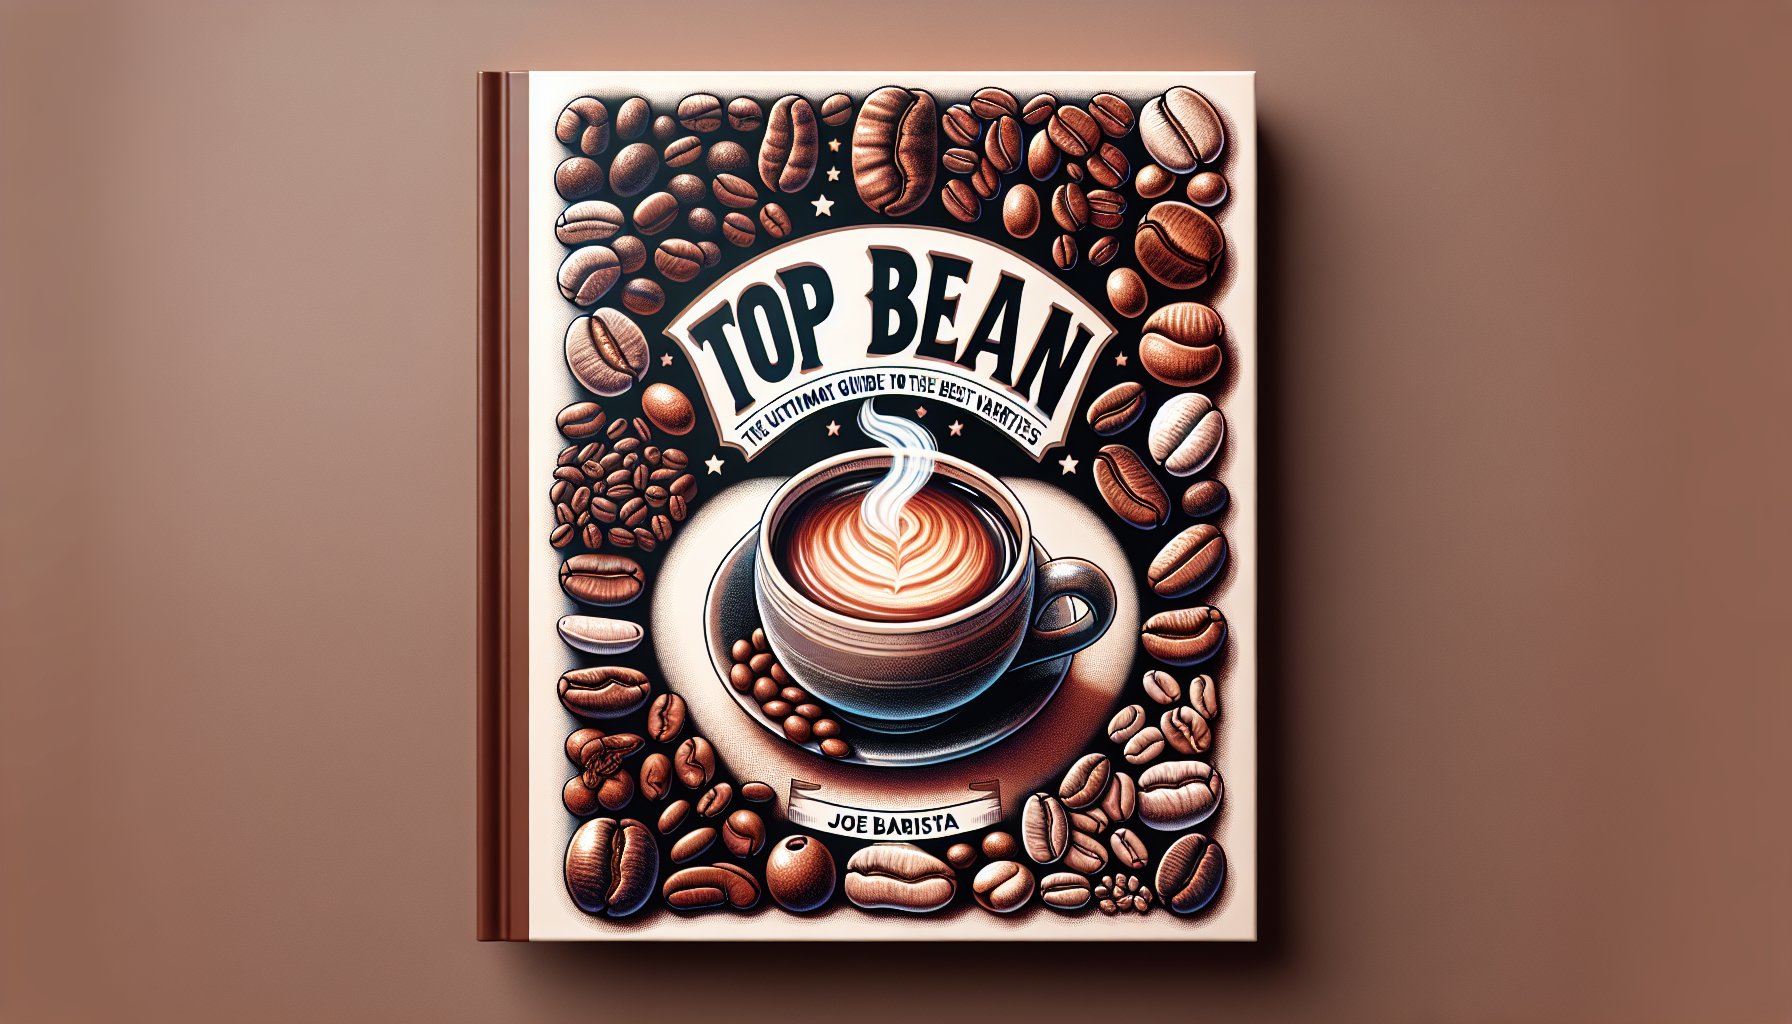 A detailed illustration of a book cover titled, 'Top Bean Picks: The Ultimate Guide to the Best Coffee Varieties'. The cover features various types of coffee beans arranged in an aesthetically pleasin